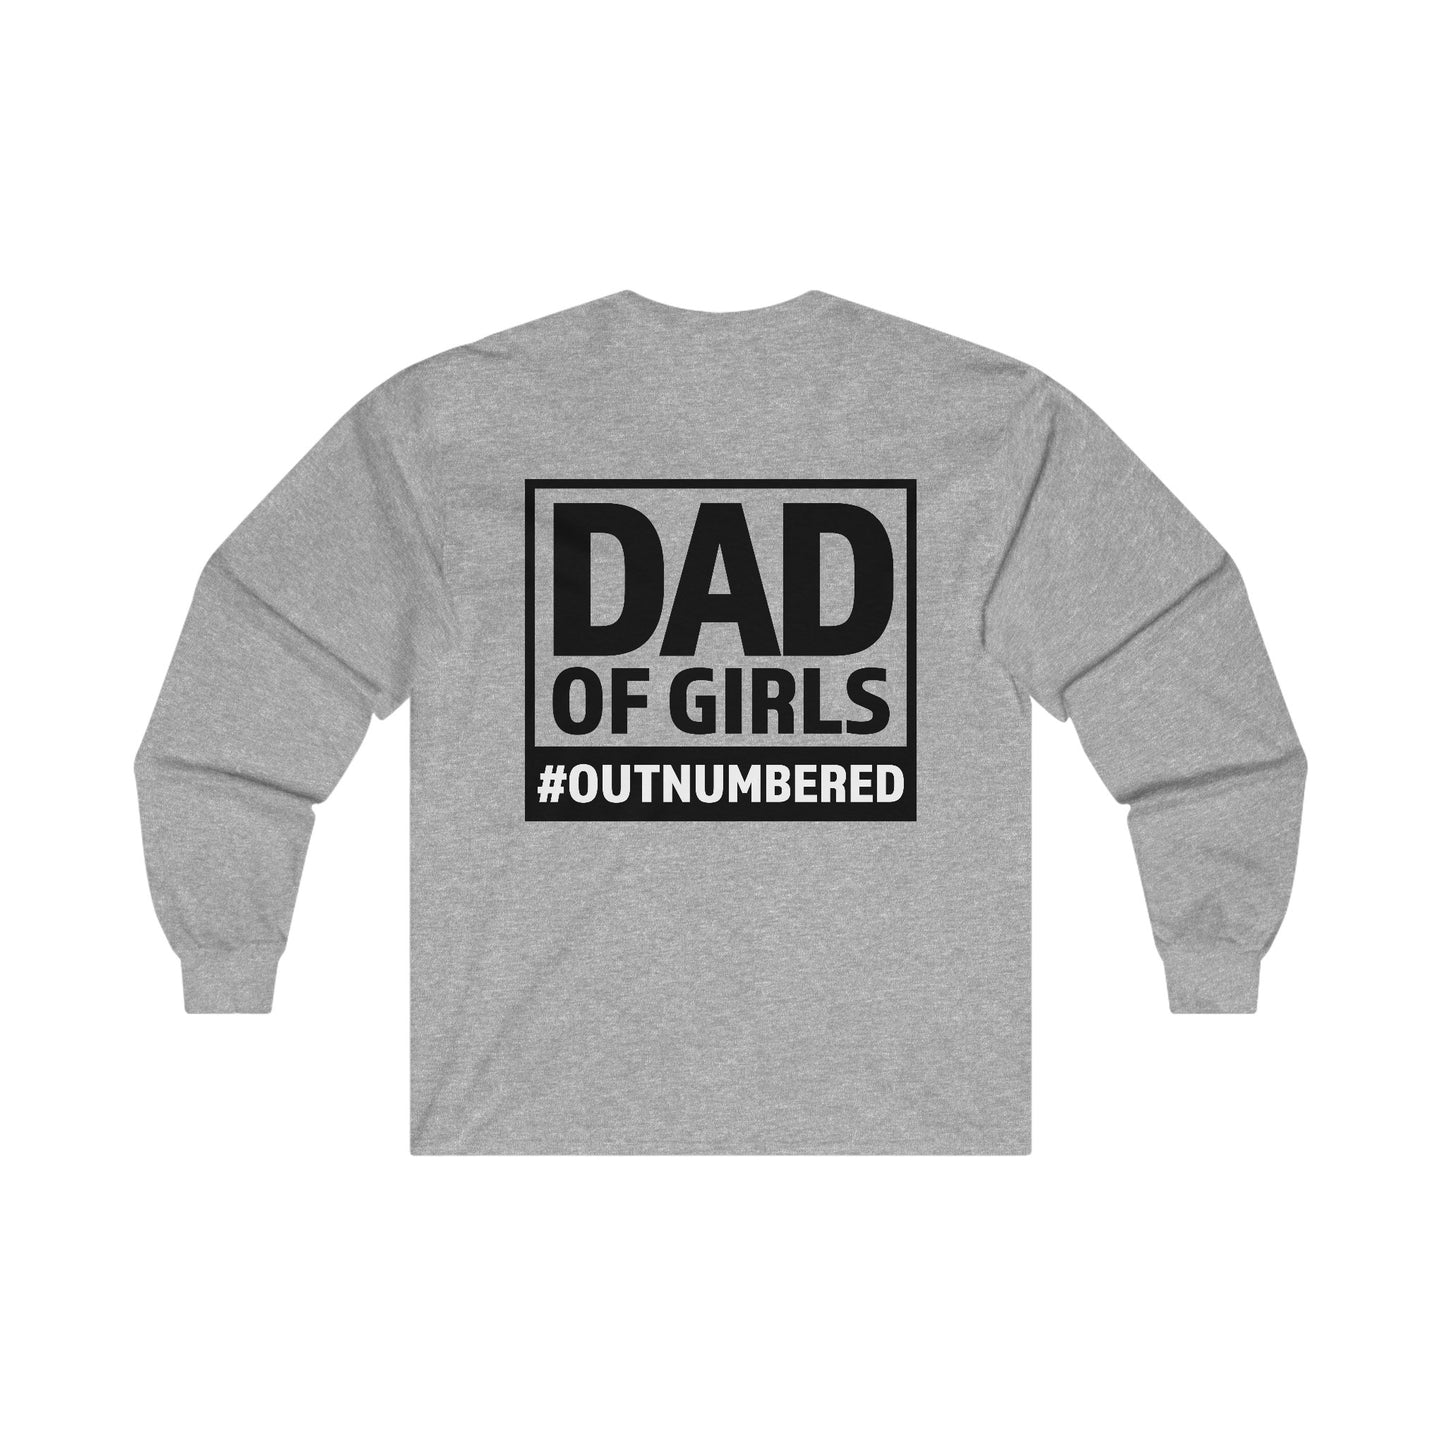 Dad of Girls Outnumbered Ultra Cotton Long Sleeve Tee